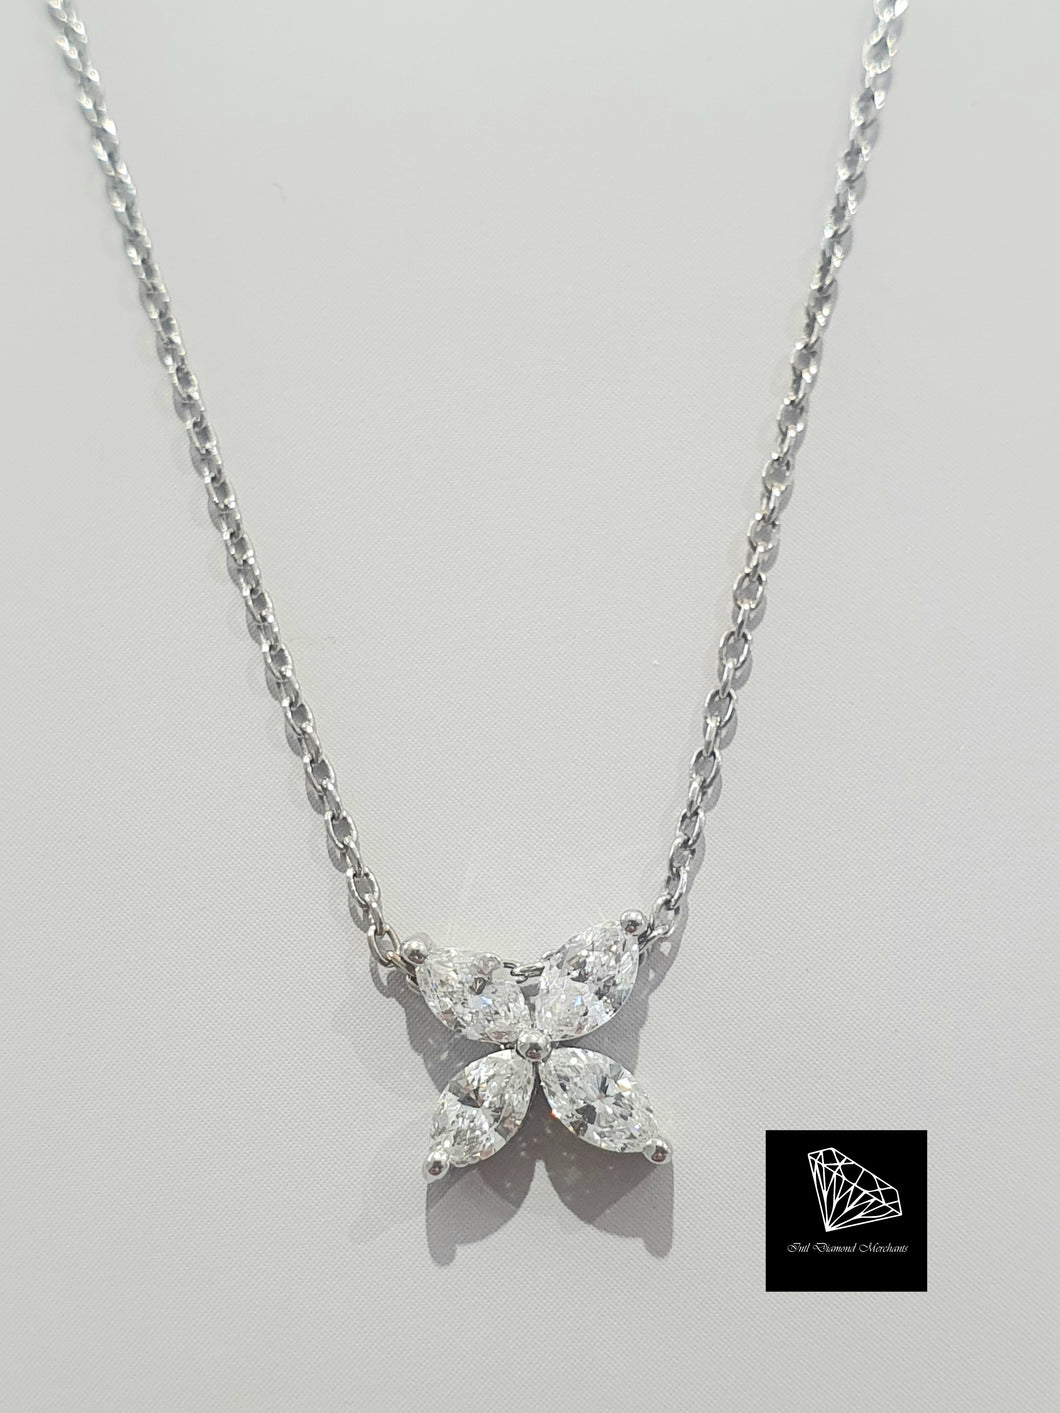 0.435cts [4] Marquise Cut Diamonds | Designer Necklace | 18kt White Gold